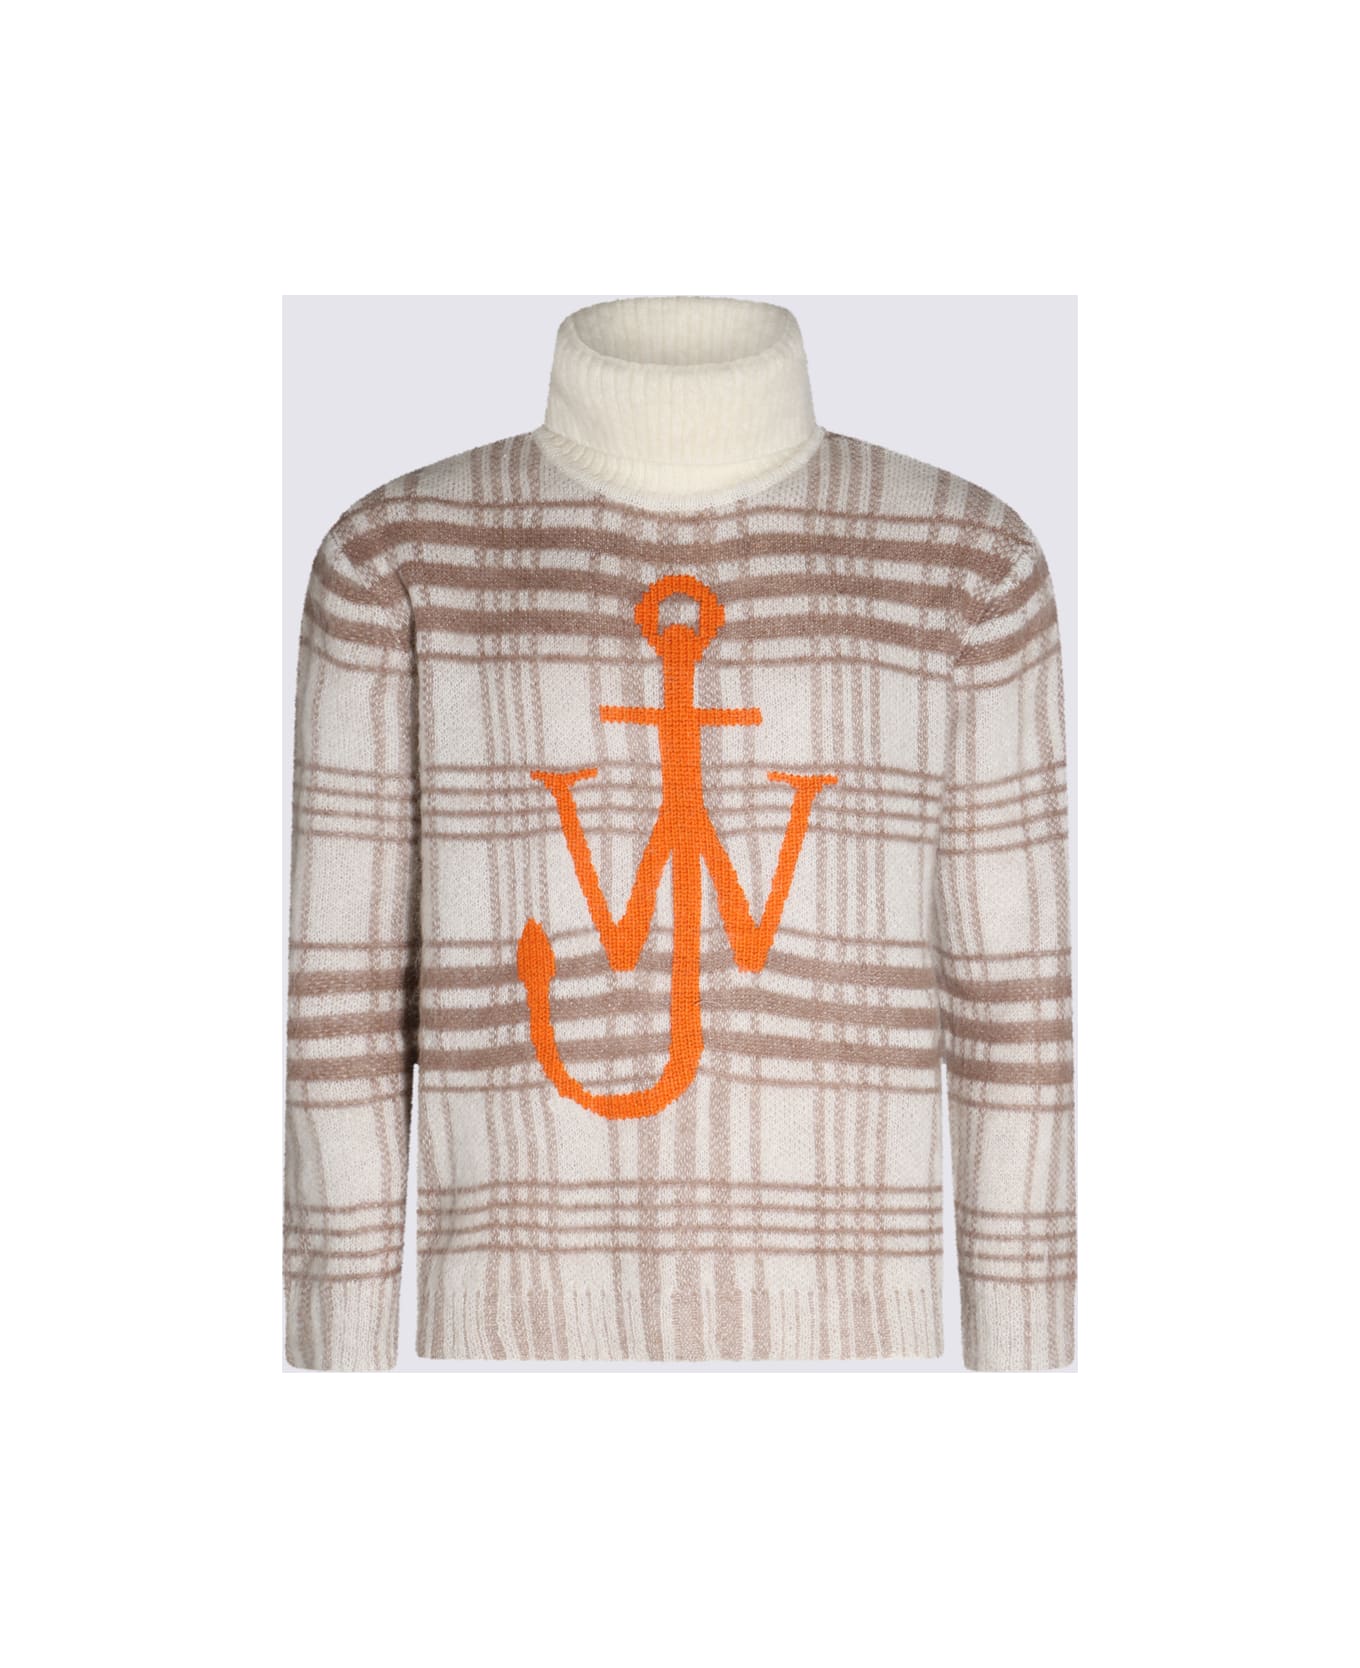 J.W. Anderson White, Brown And Orange Wool Blend Jumper - OFF WHITE-BROWN